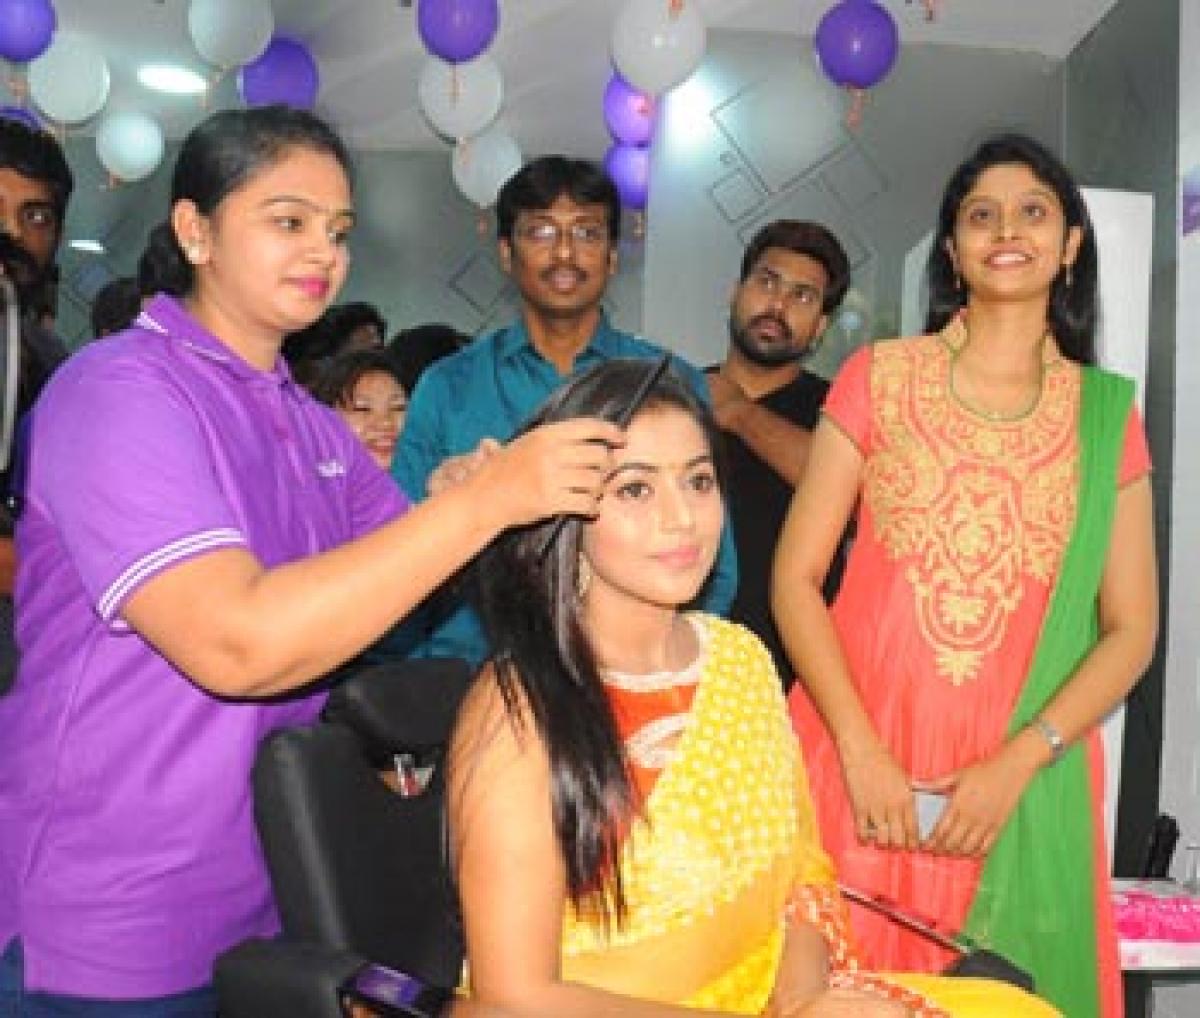 Naturals opens new salon in city